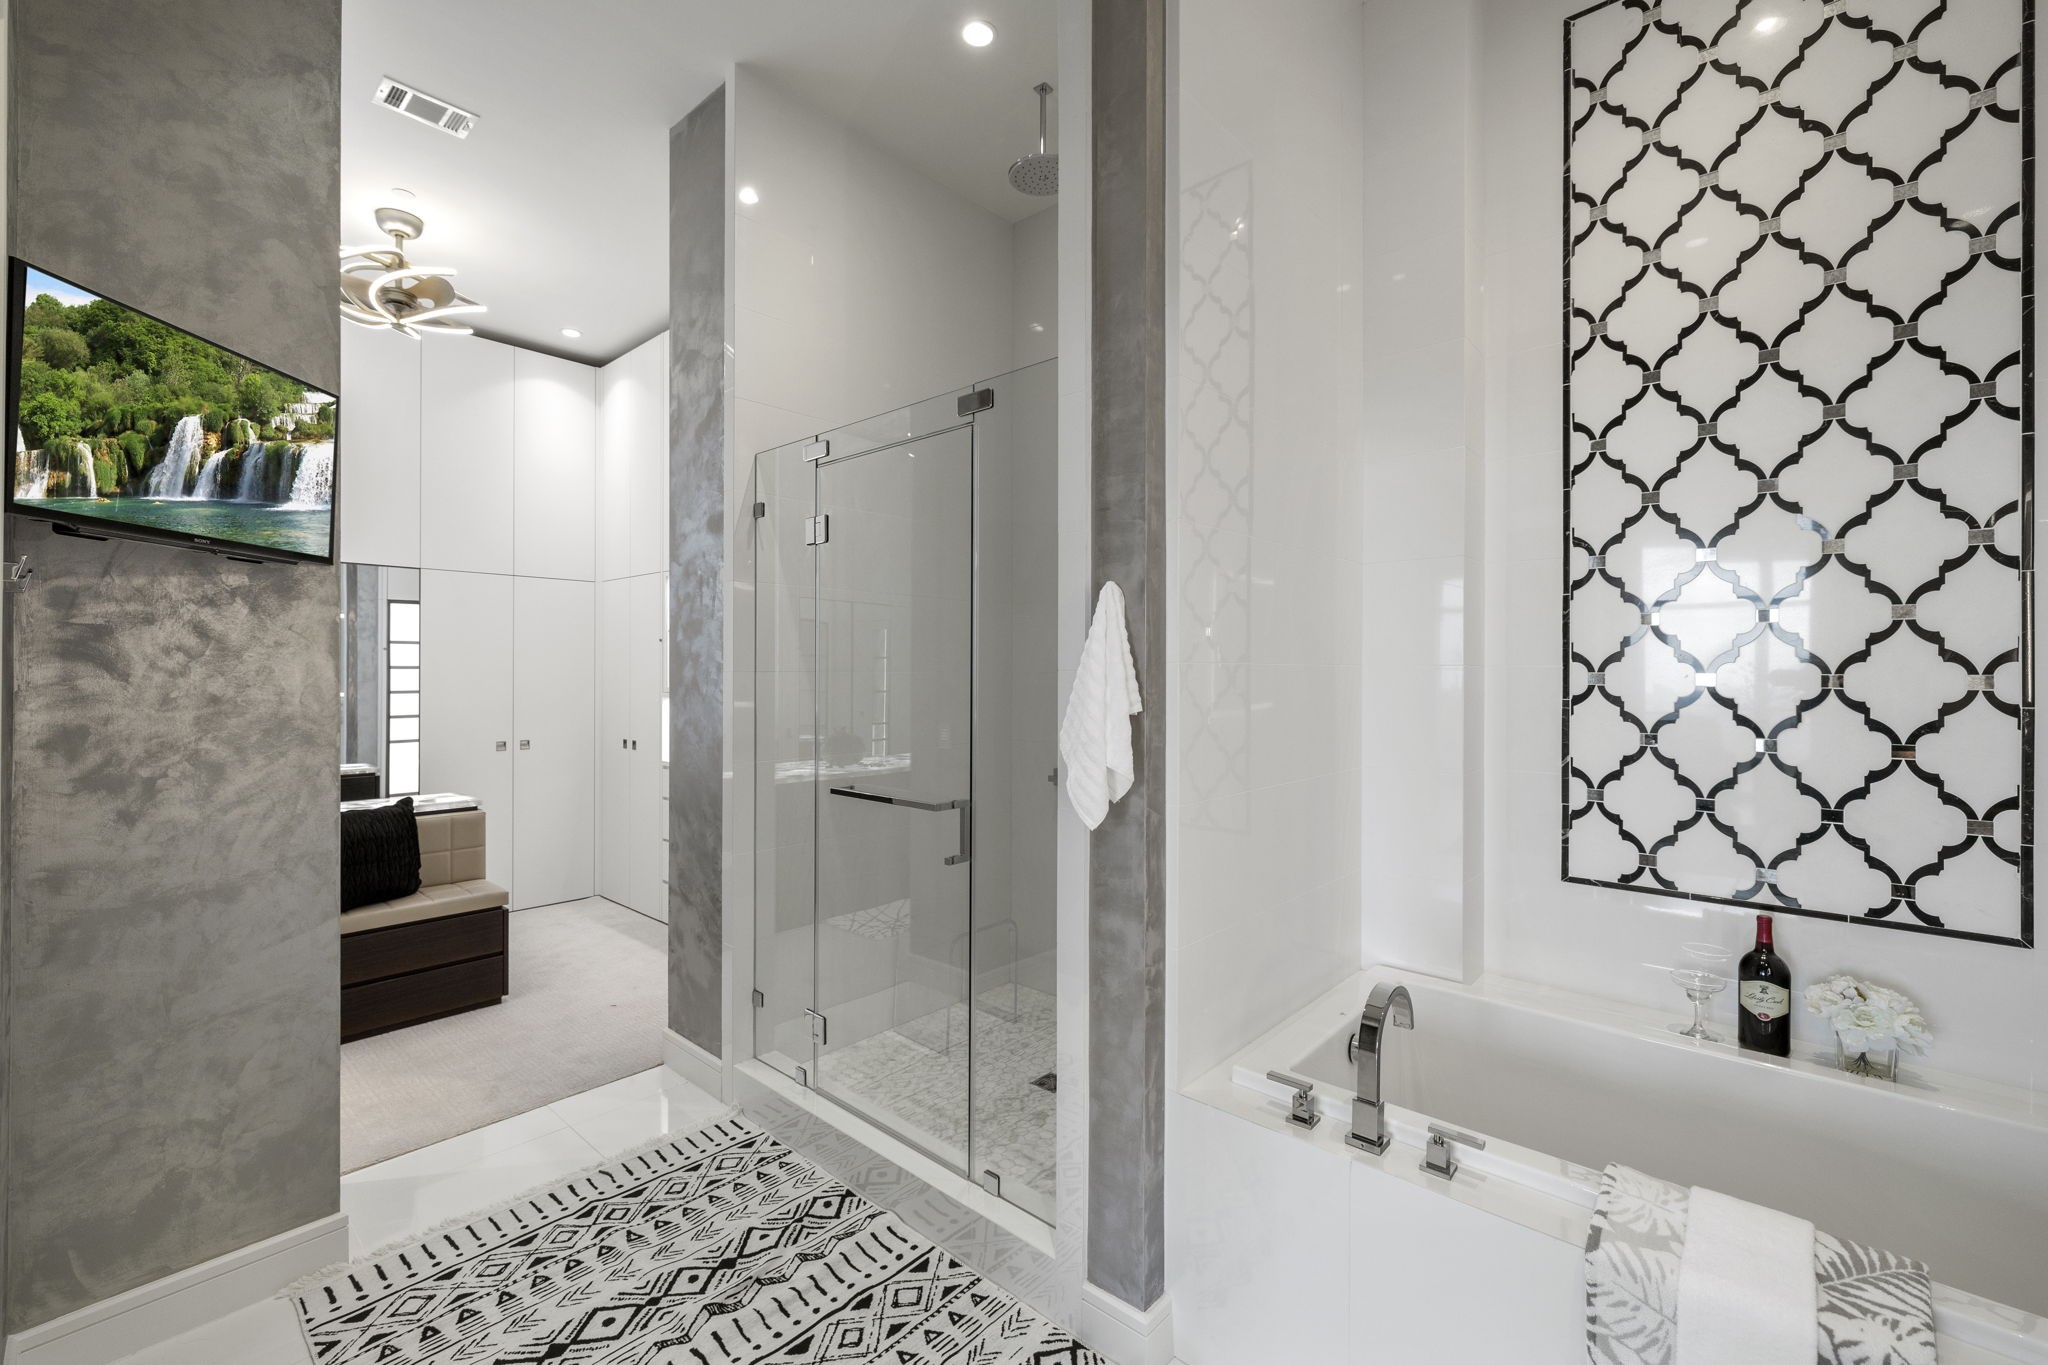 Step into a custom his/her split primary bath, thoughtfully designed to exceed the highest expectations. This luxurious oasis showcases a stunning oversized primary closet, catering to your every desire.